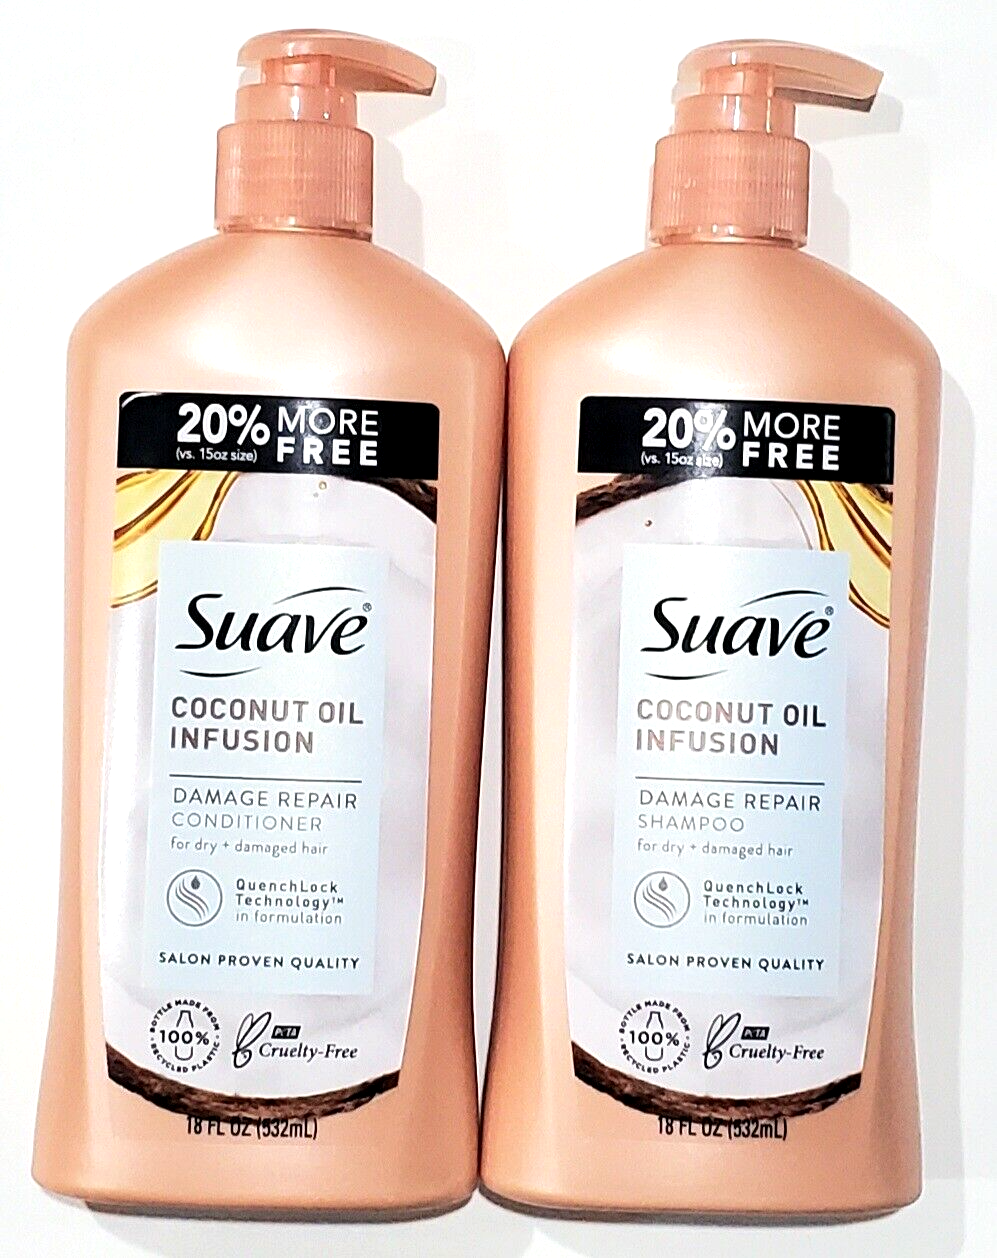 Suave Coconut Oil Infusion Shampoo Conditioner Set Damage Repair Quenchlock... - $21.99